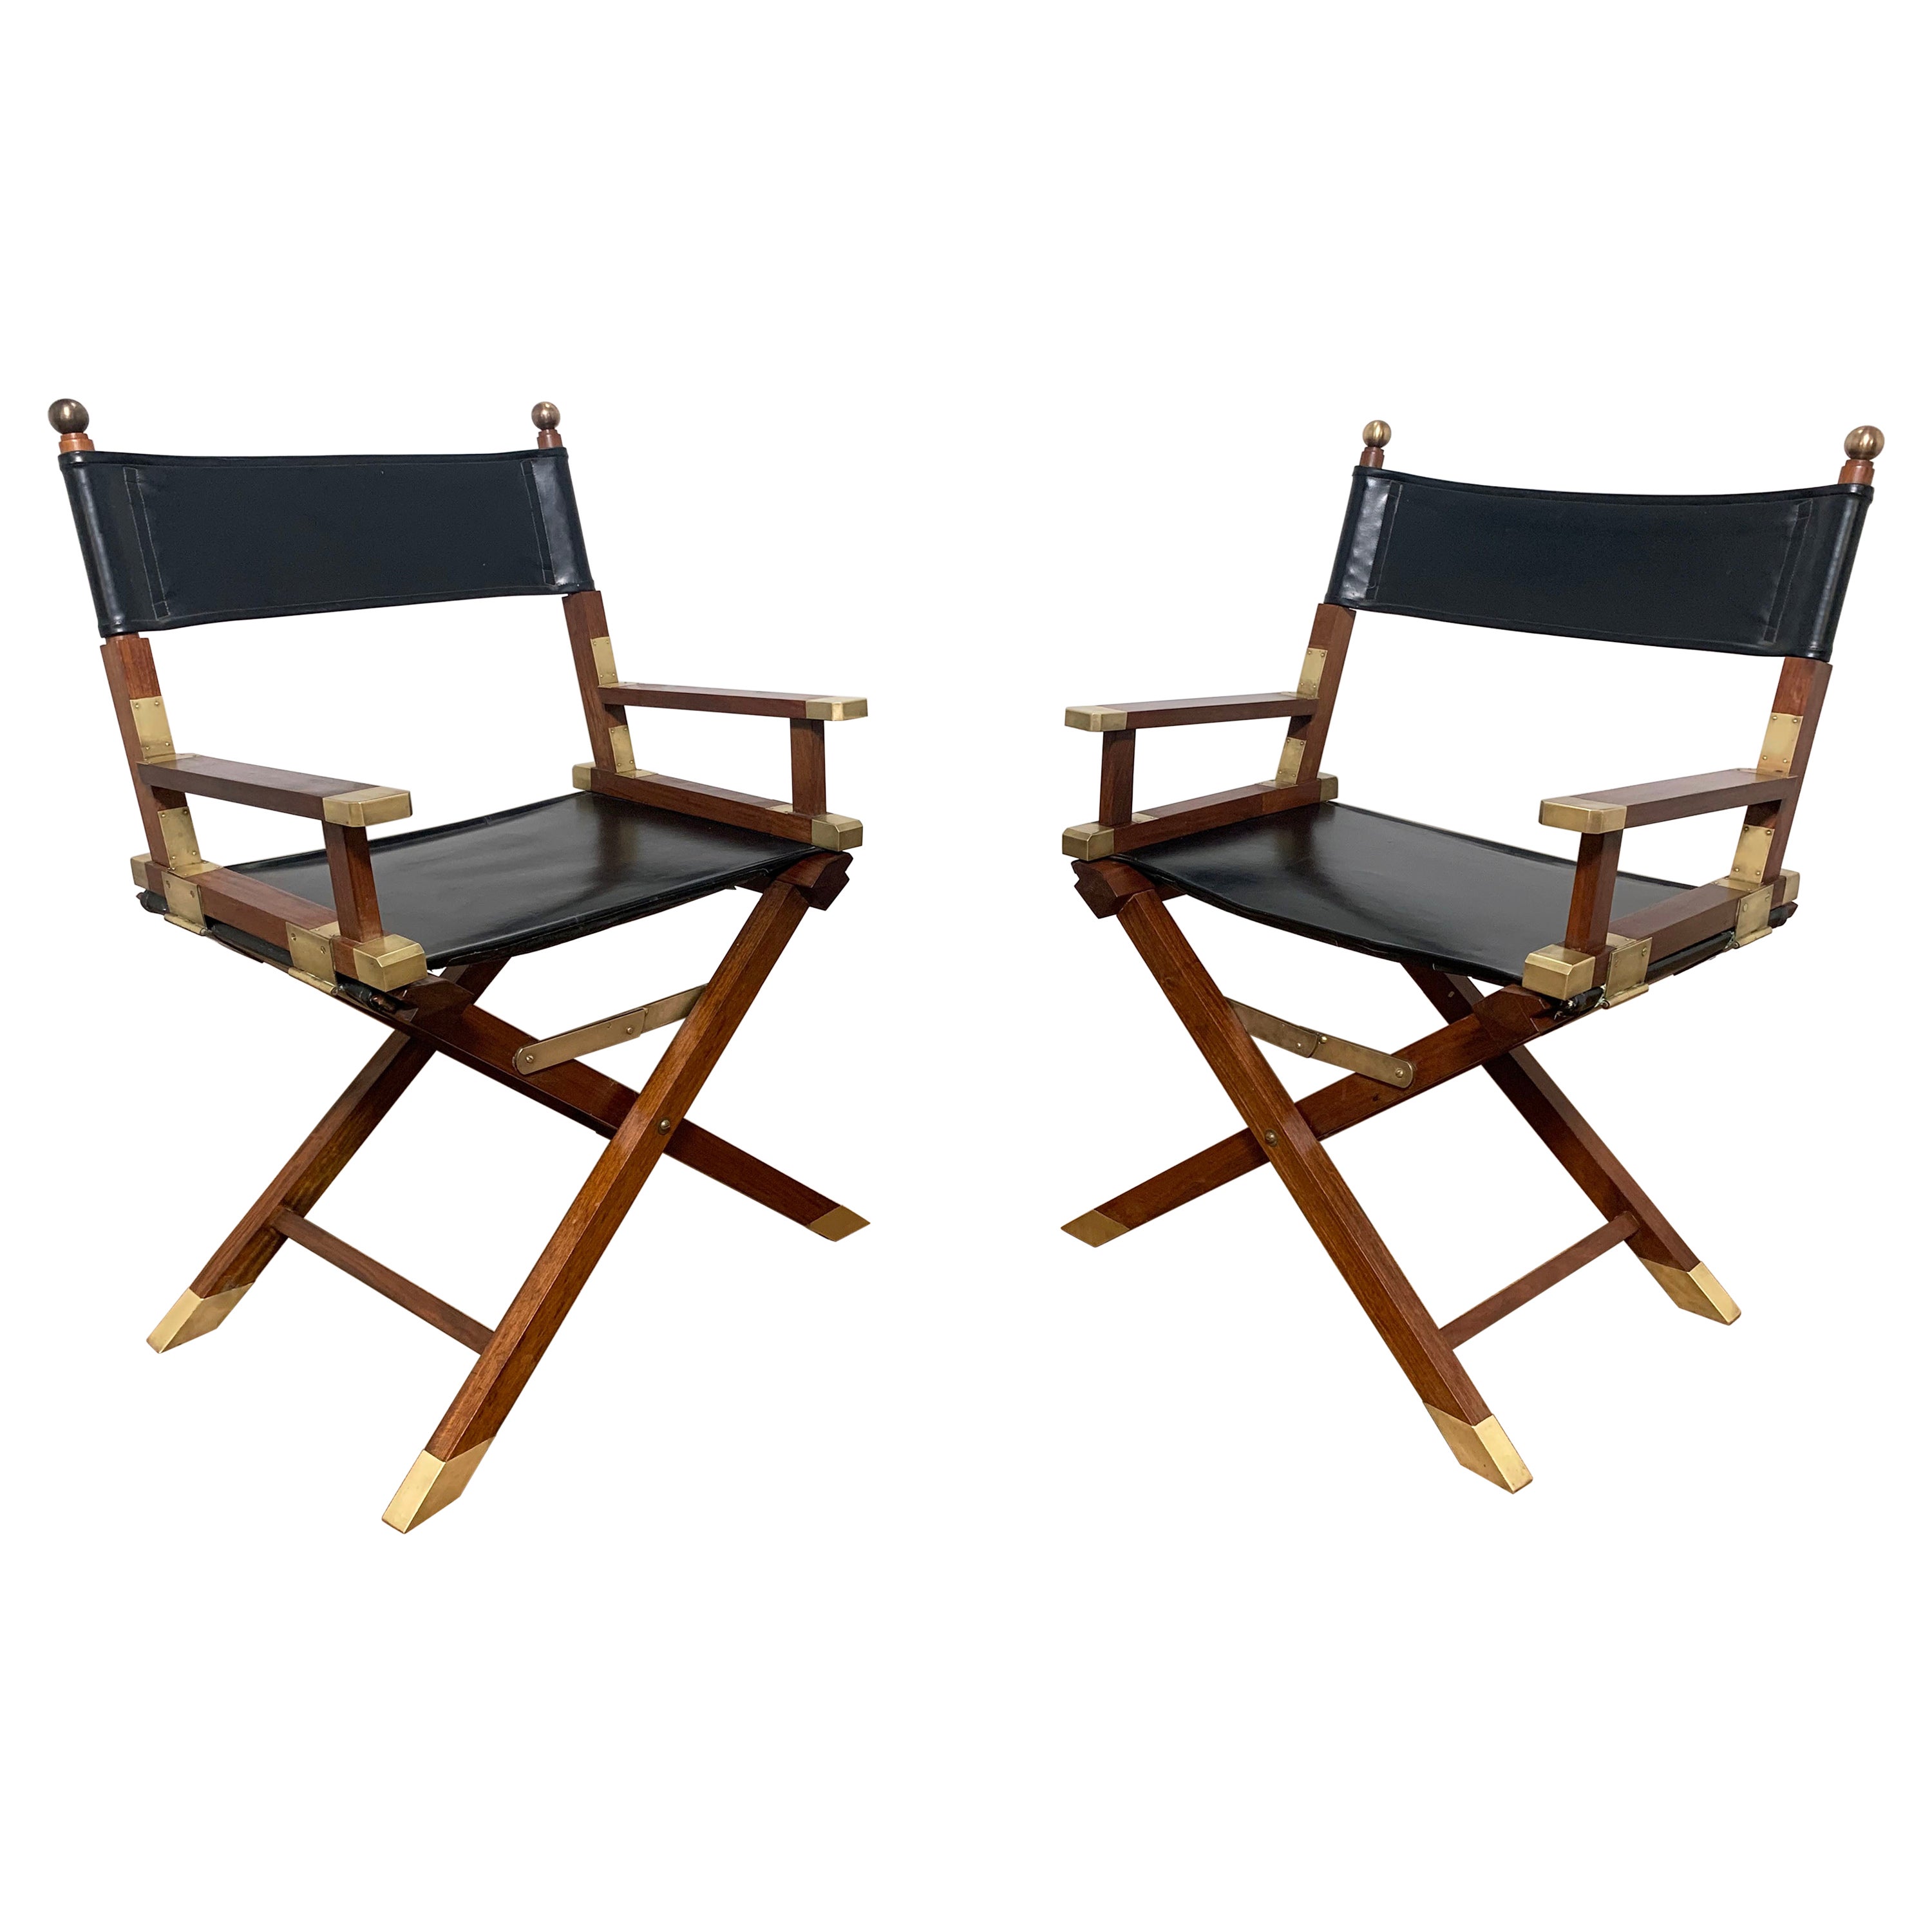 Pair of Bespoke Charlotte Horstmann Rosewood and Brass Campaign Chairs, C. 1950s For Sale